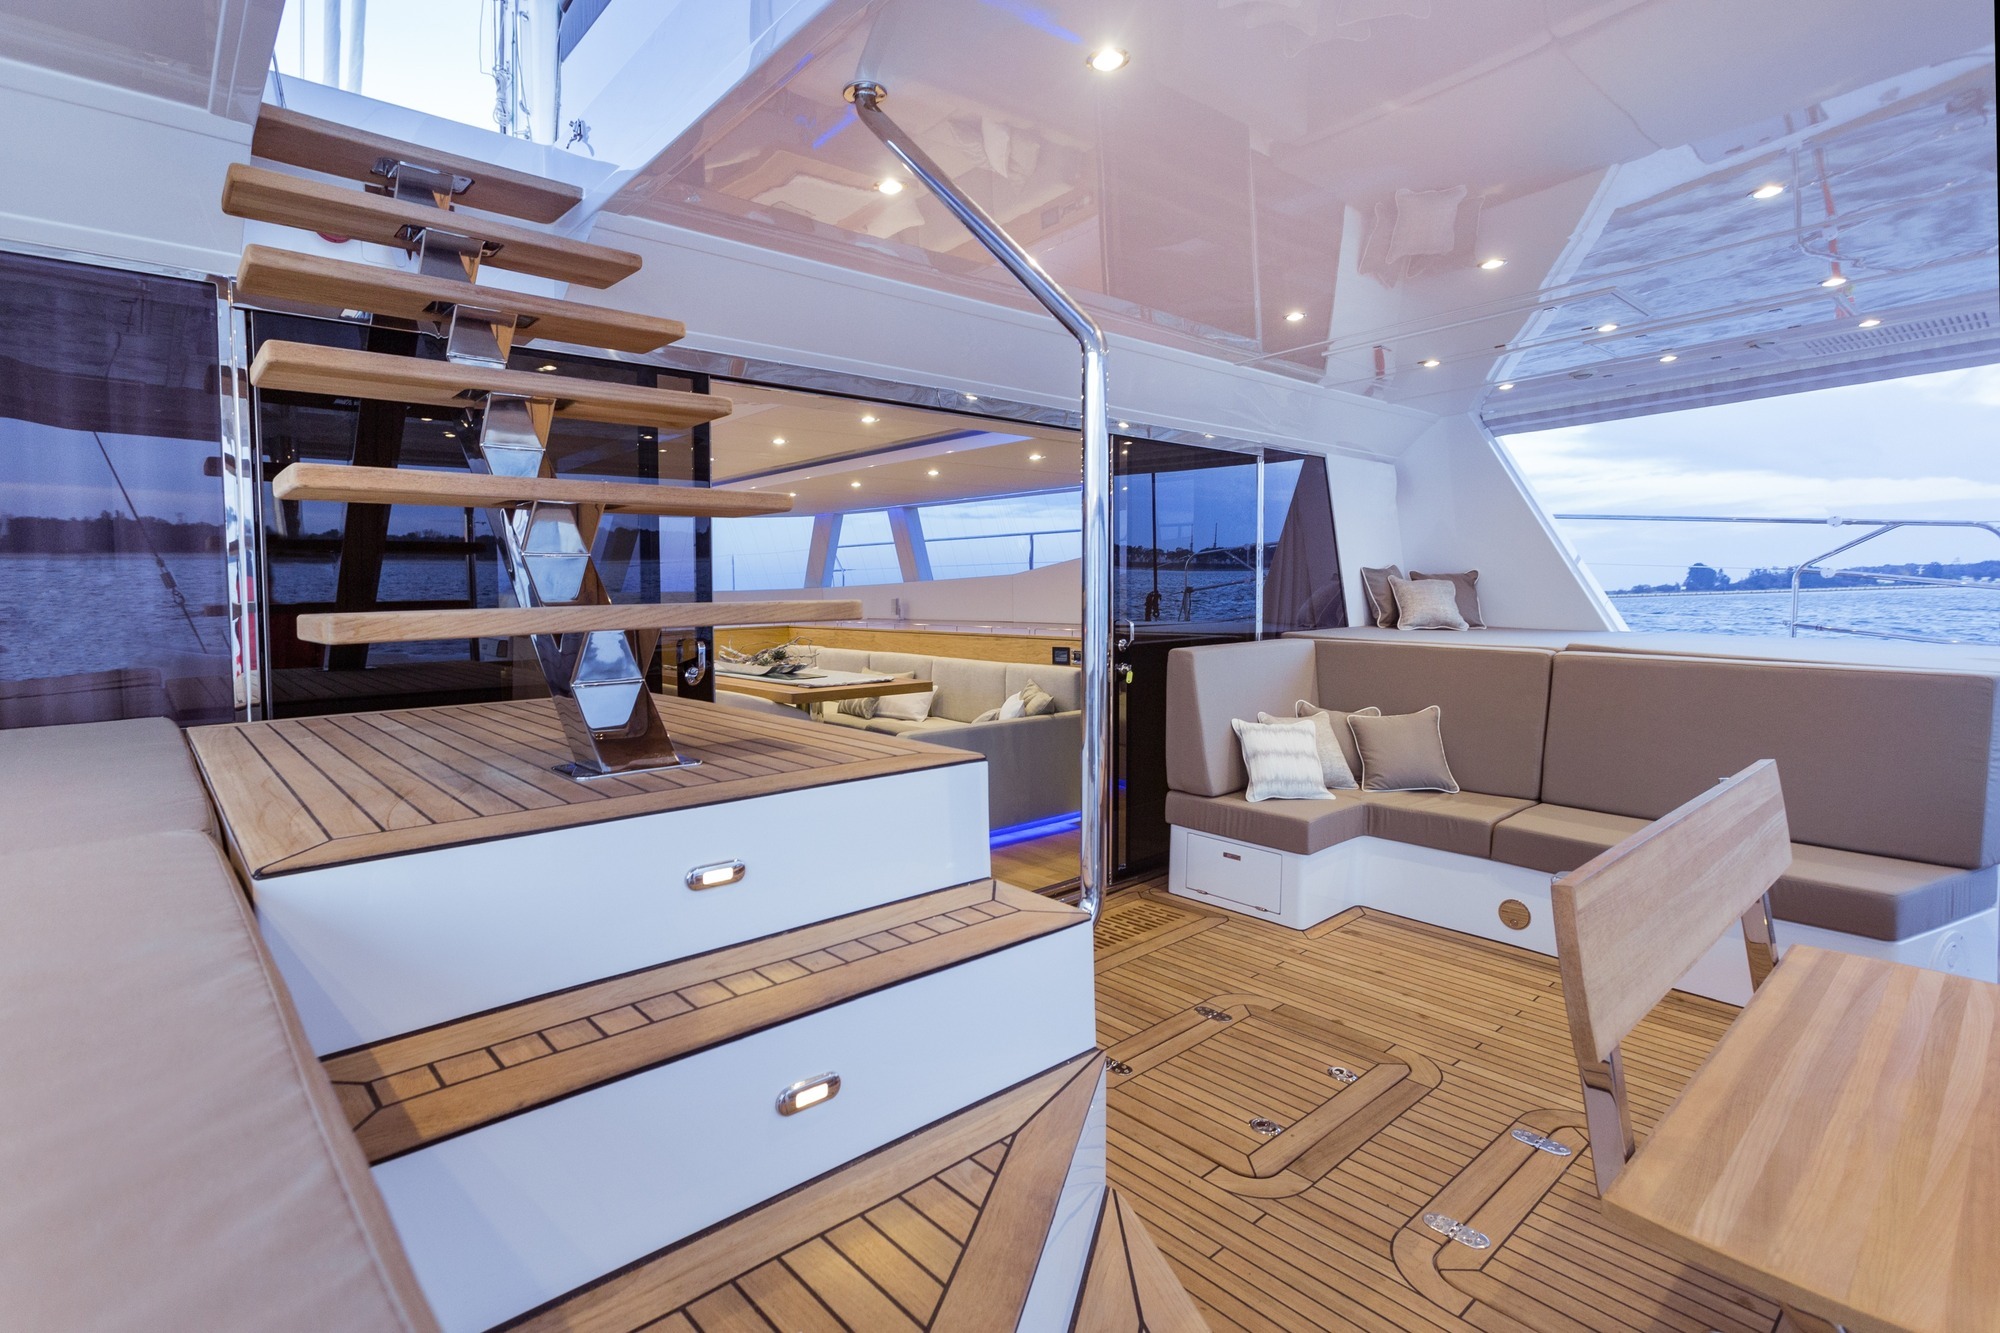 Aft Deck With Access To Upper Deck